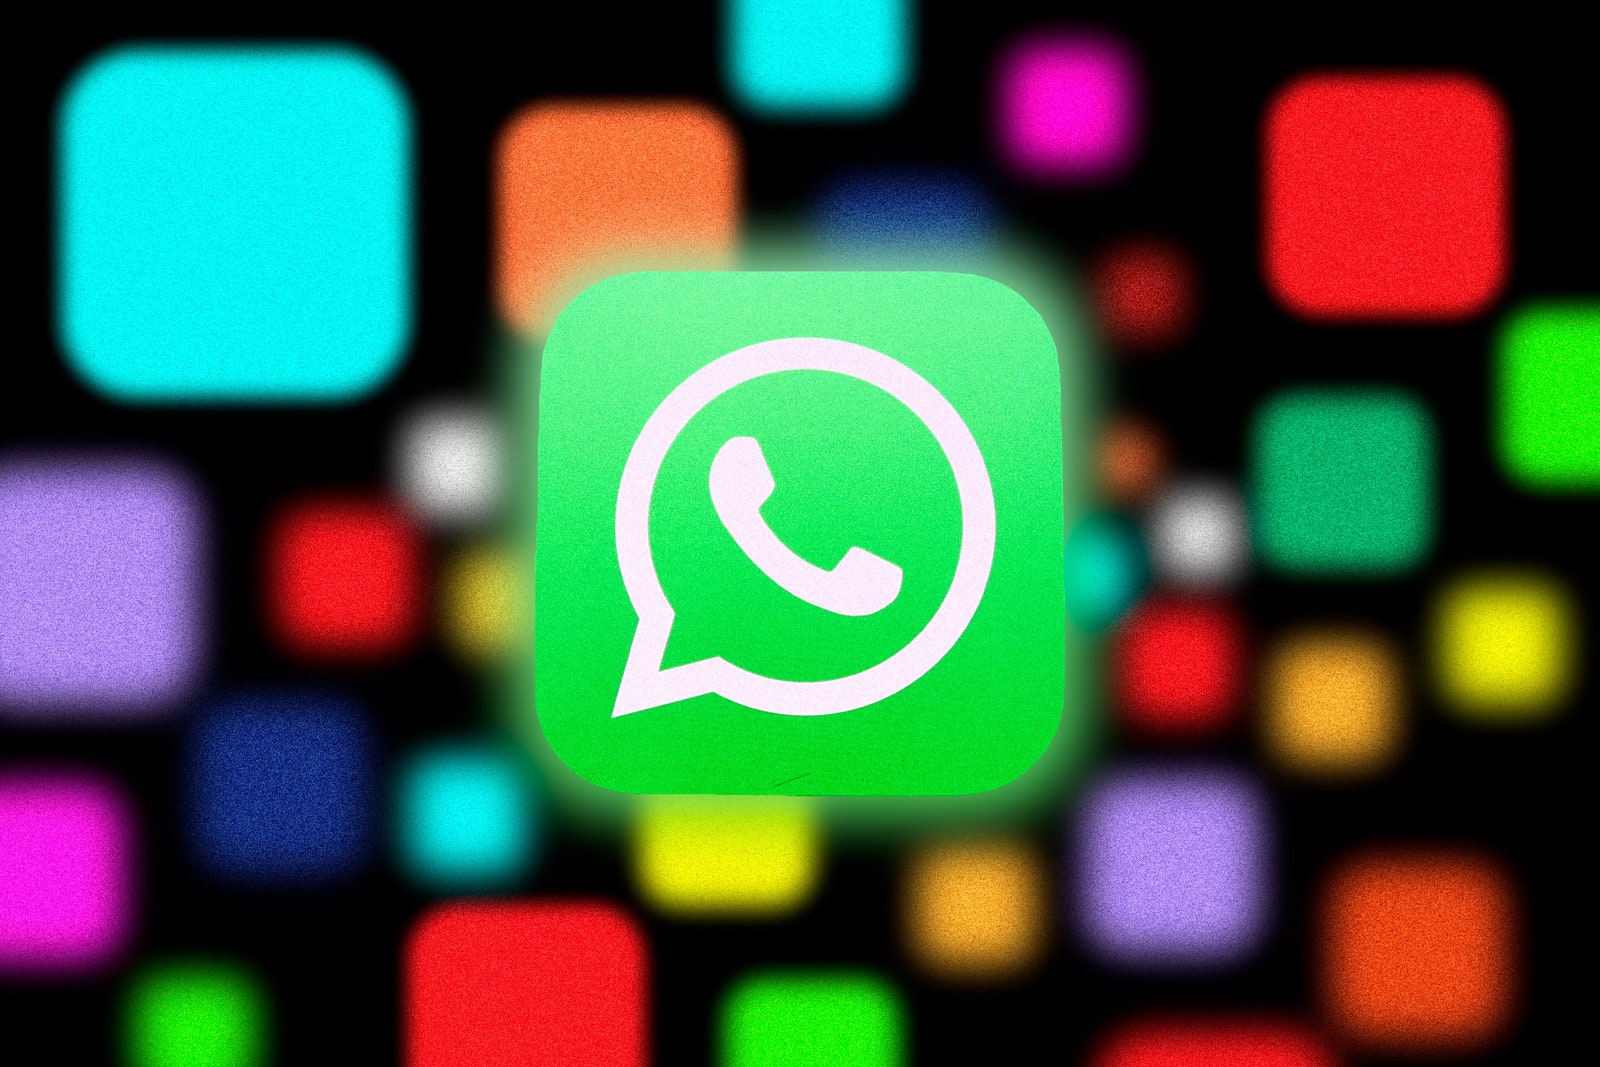 WhatsApp Chats Will Soon Work With Other Encrypted Messaging Apps